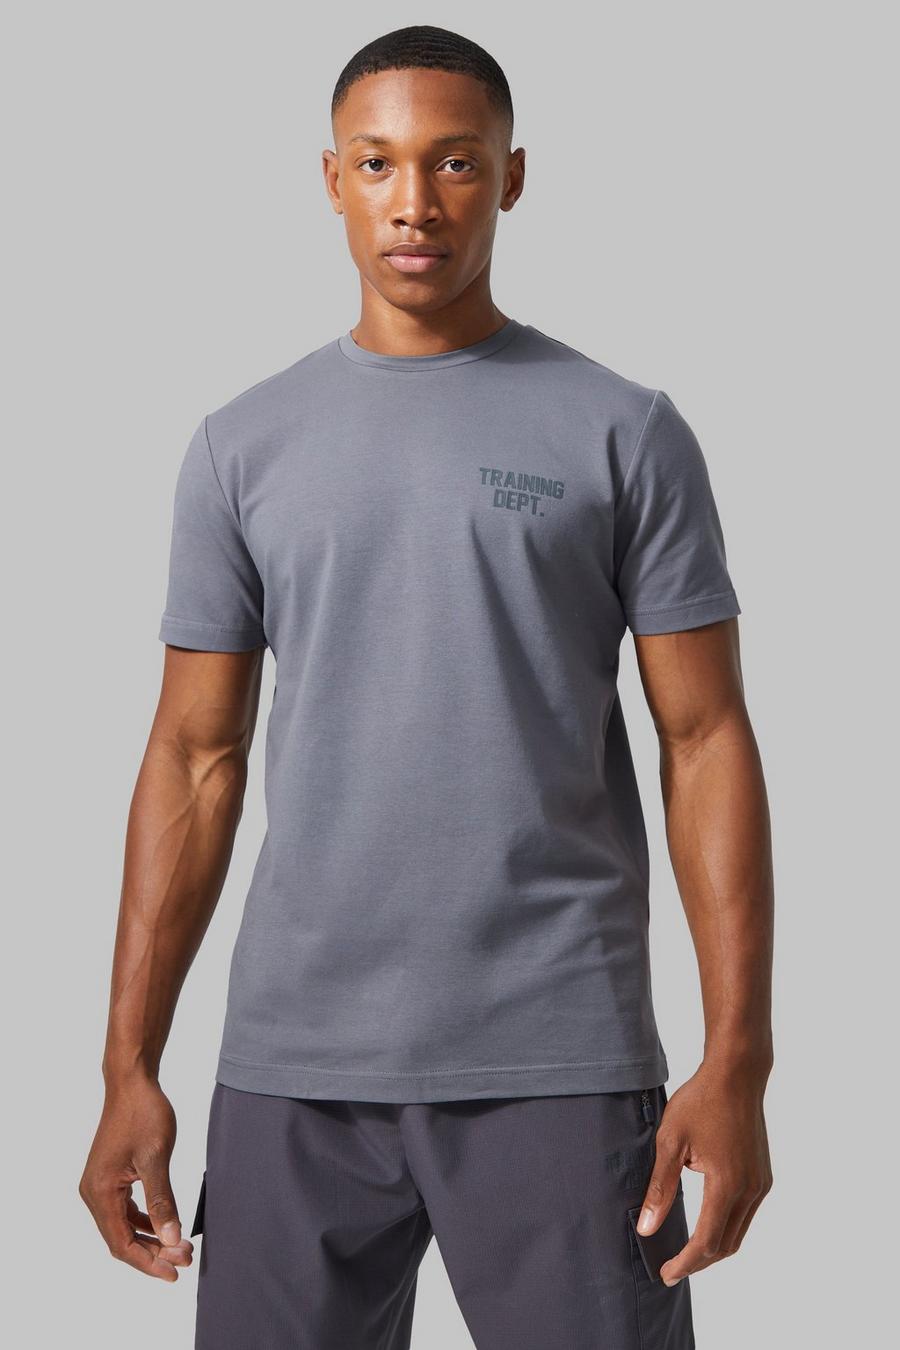 Active Training Dept Performance T-Shirt, Charcoal image number 1